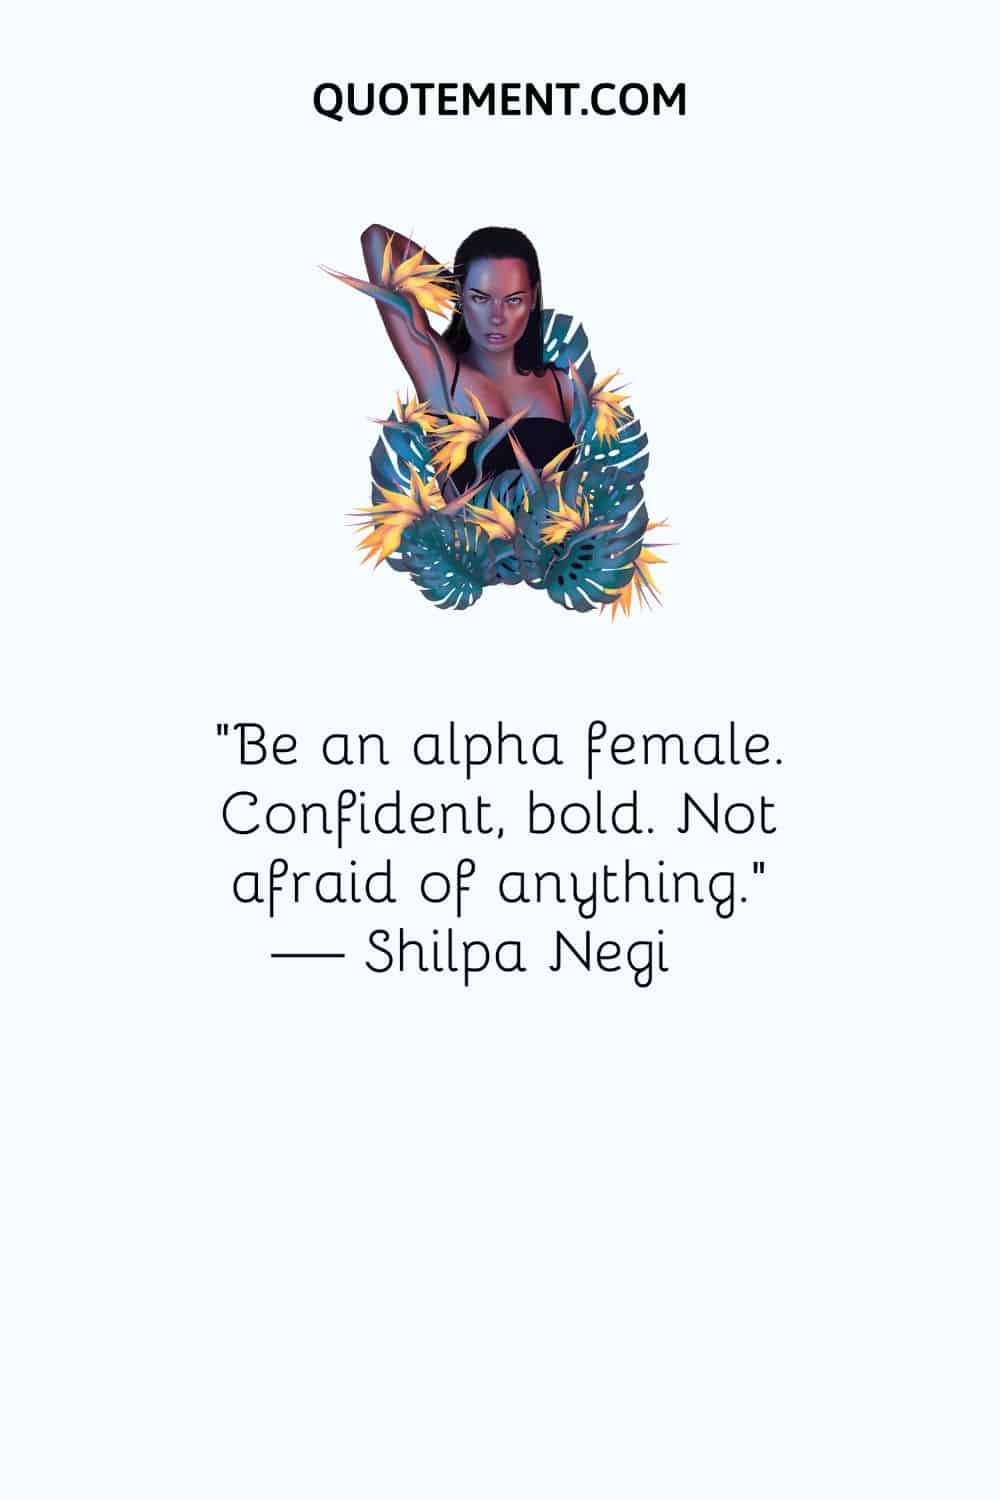 Be an alpha female. Confident, bold. Not afraid of anything